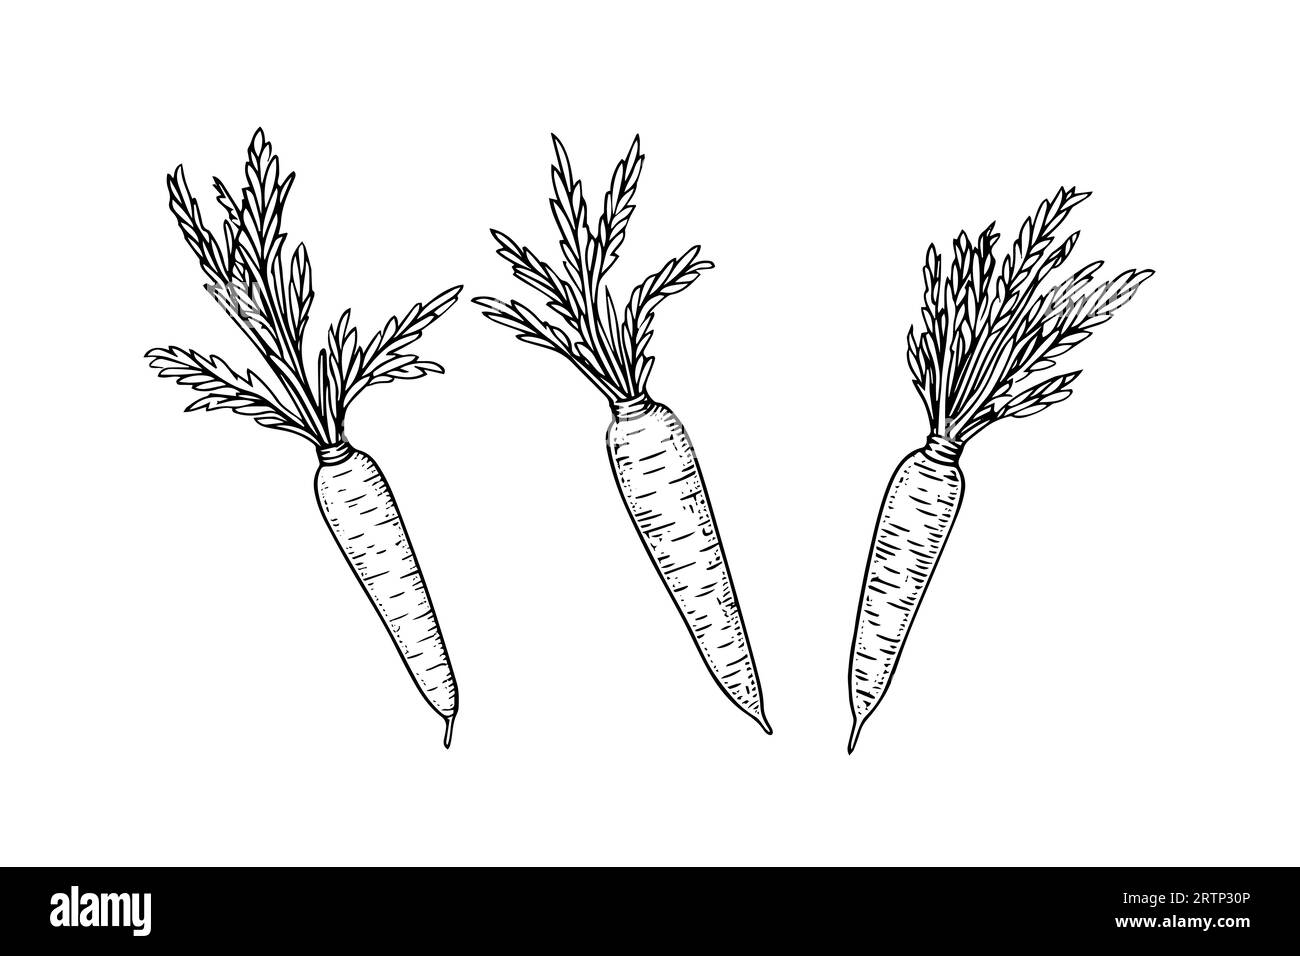 Carrot with tops. Engraving sketch hand drawn vector illustration. Stock Vector